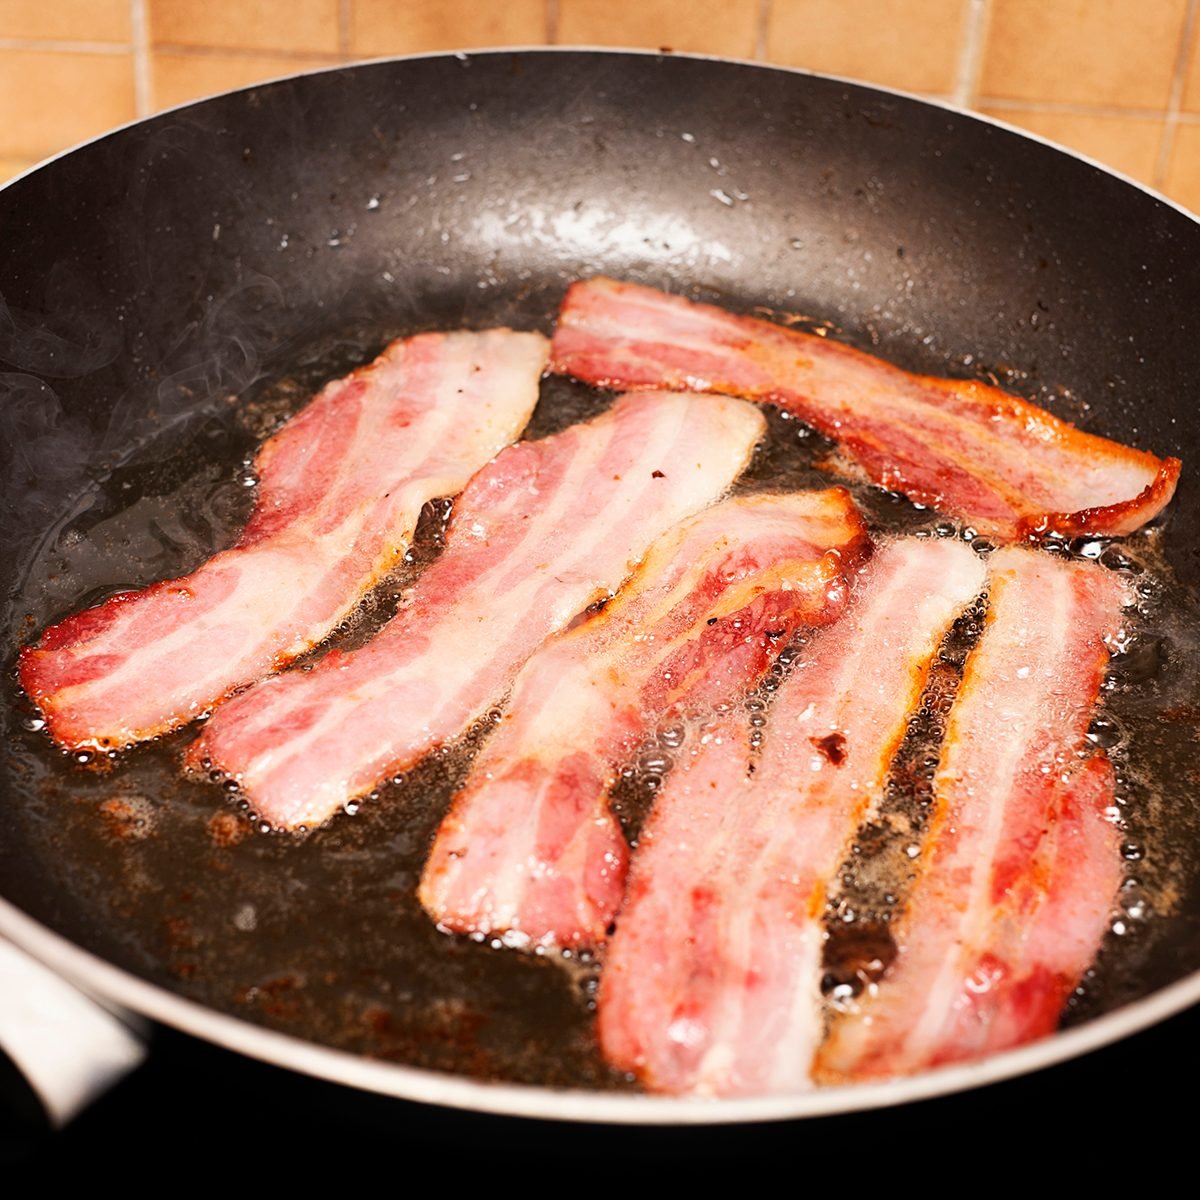 https://www.tasteofhome.com/wp-content/uploads/2020/02/bacon-GettyImages-182868566.jpg?fit=700%2C700